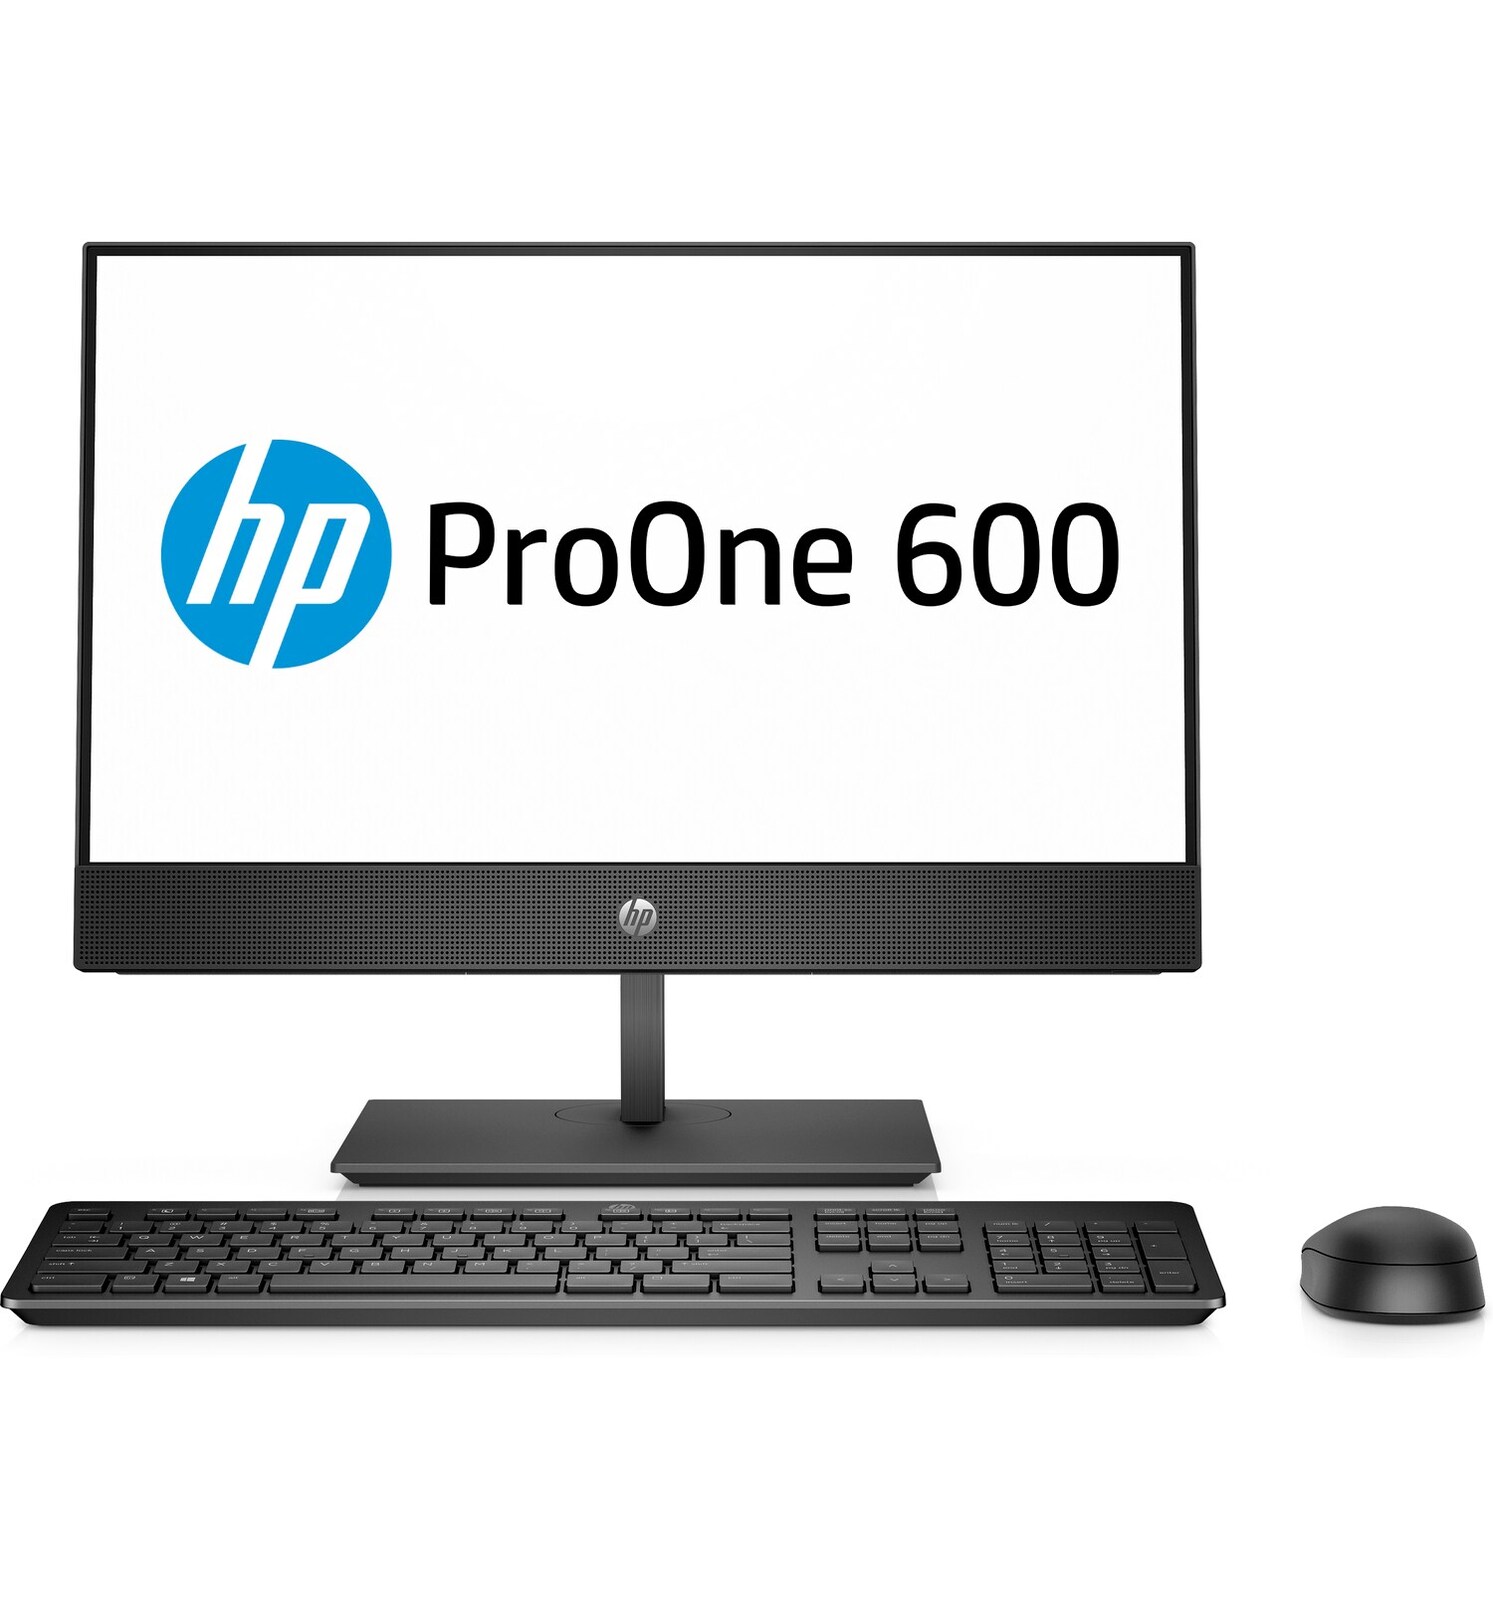 HP ProOne 600 G4 AiO Non-Touch (4WG04PA) i5-8500T 8GB SSD-256GB 21.5